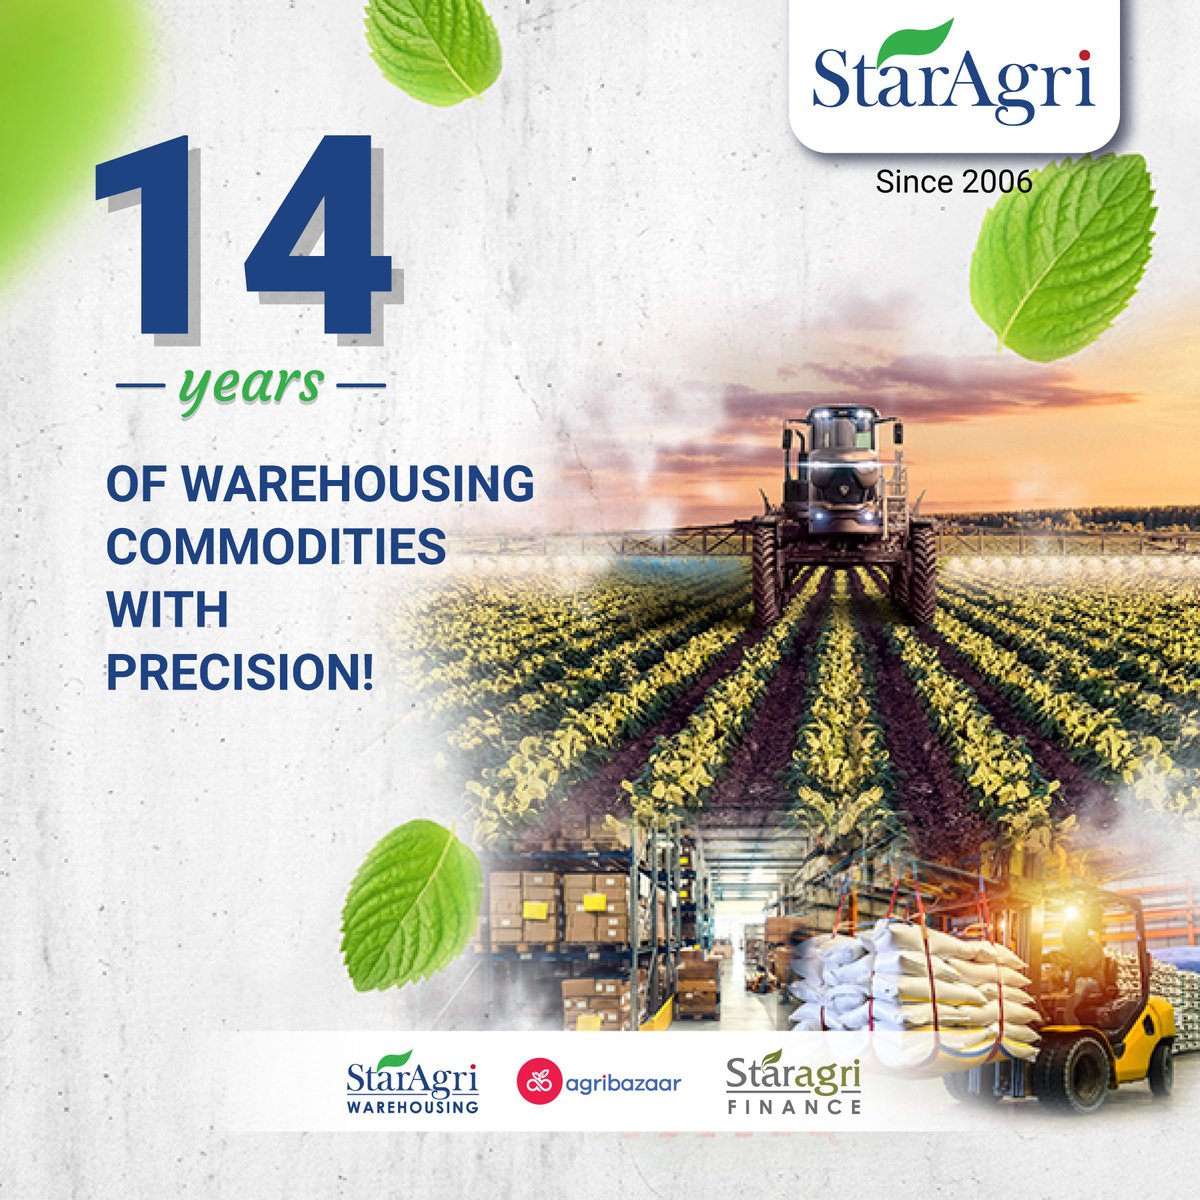 On the occasion of StarAgri's 14th Anniversary, We would like to extend our gratitude to our customers, employees and many others who have been part of our journey so far. Thank You for being part of us
#14YearsofWarehousingprecision #April2006 
#Warehousing #CollateralManagement